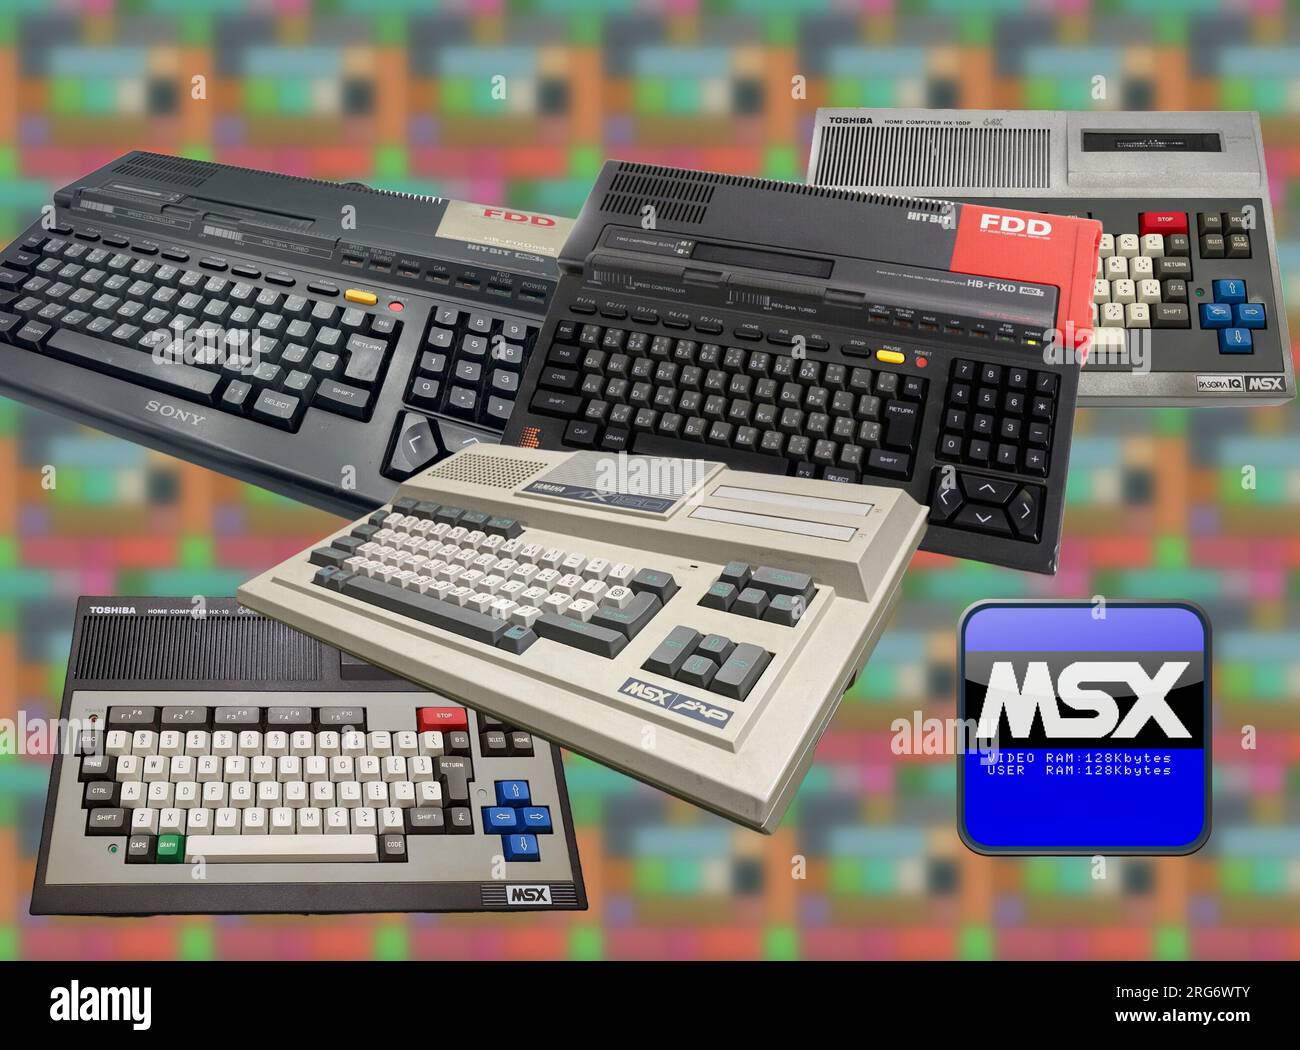 From 1983 to 1993 many computer manufacturers (especially in Japan) adopted a standard called MSX Stock Photo